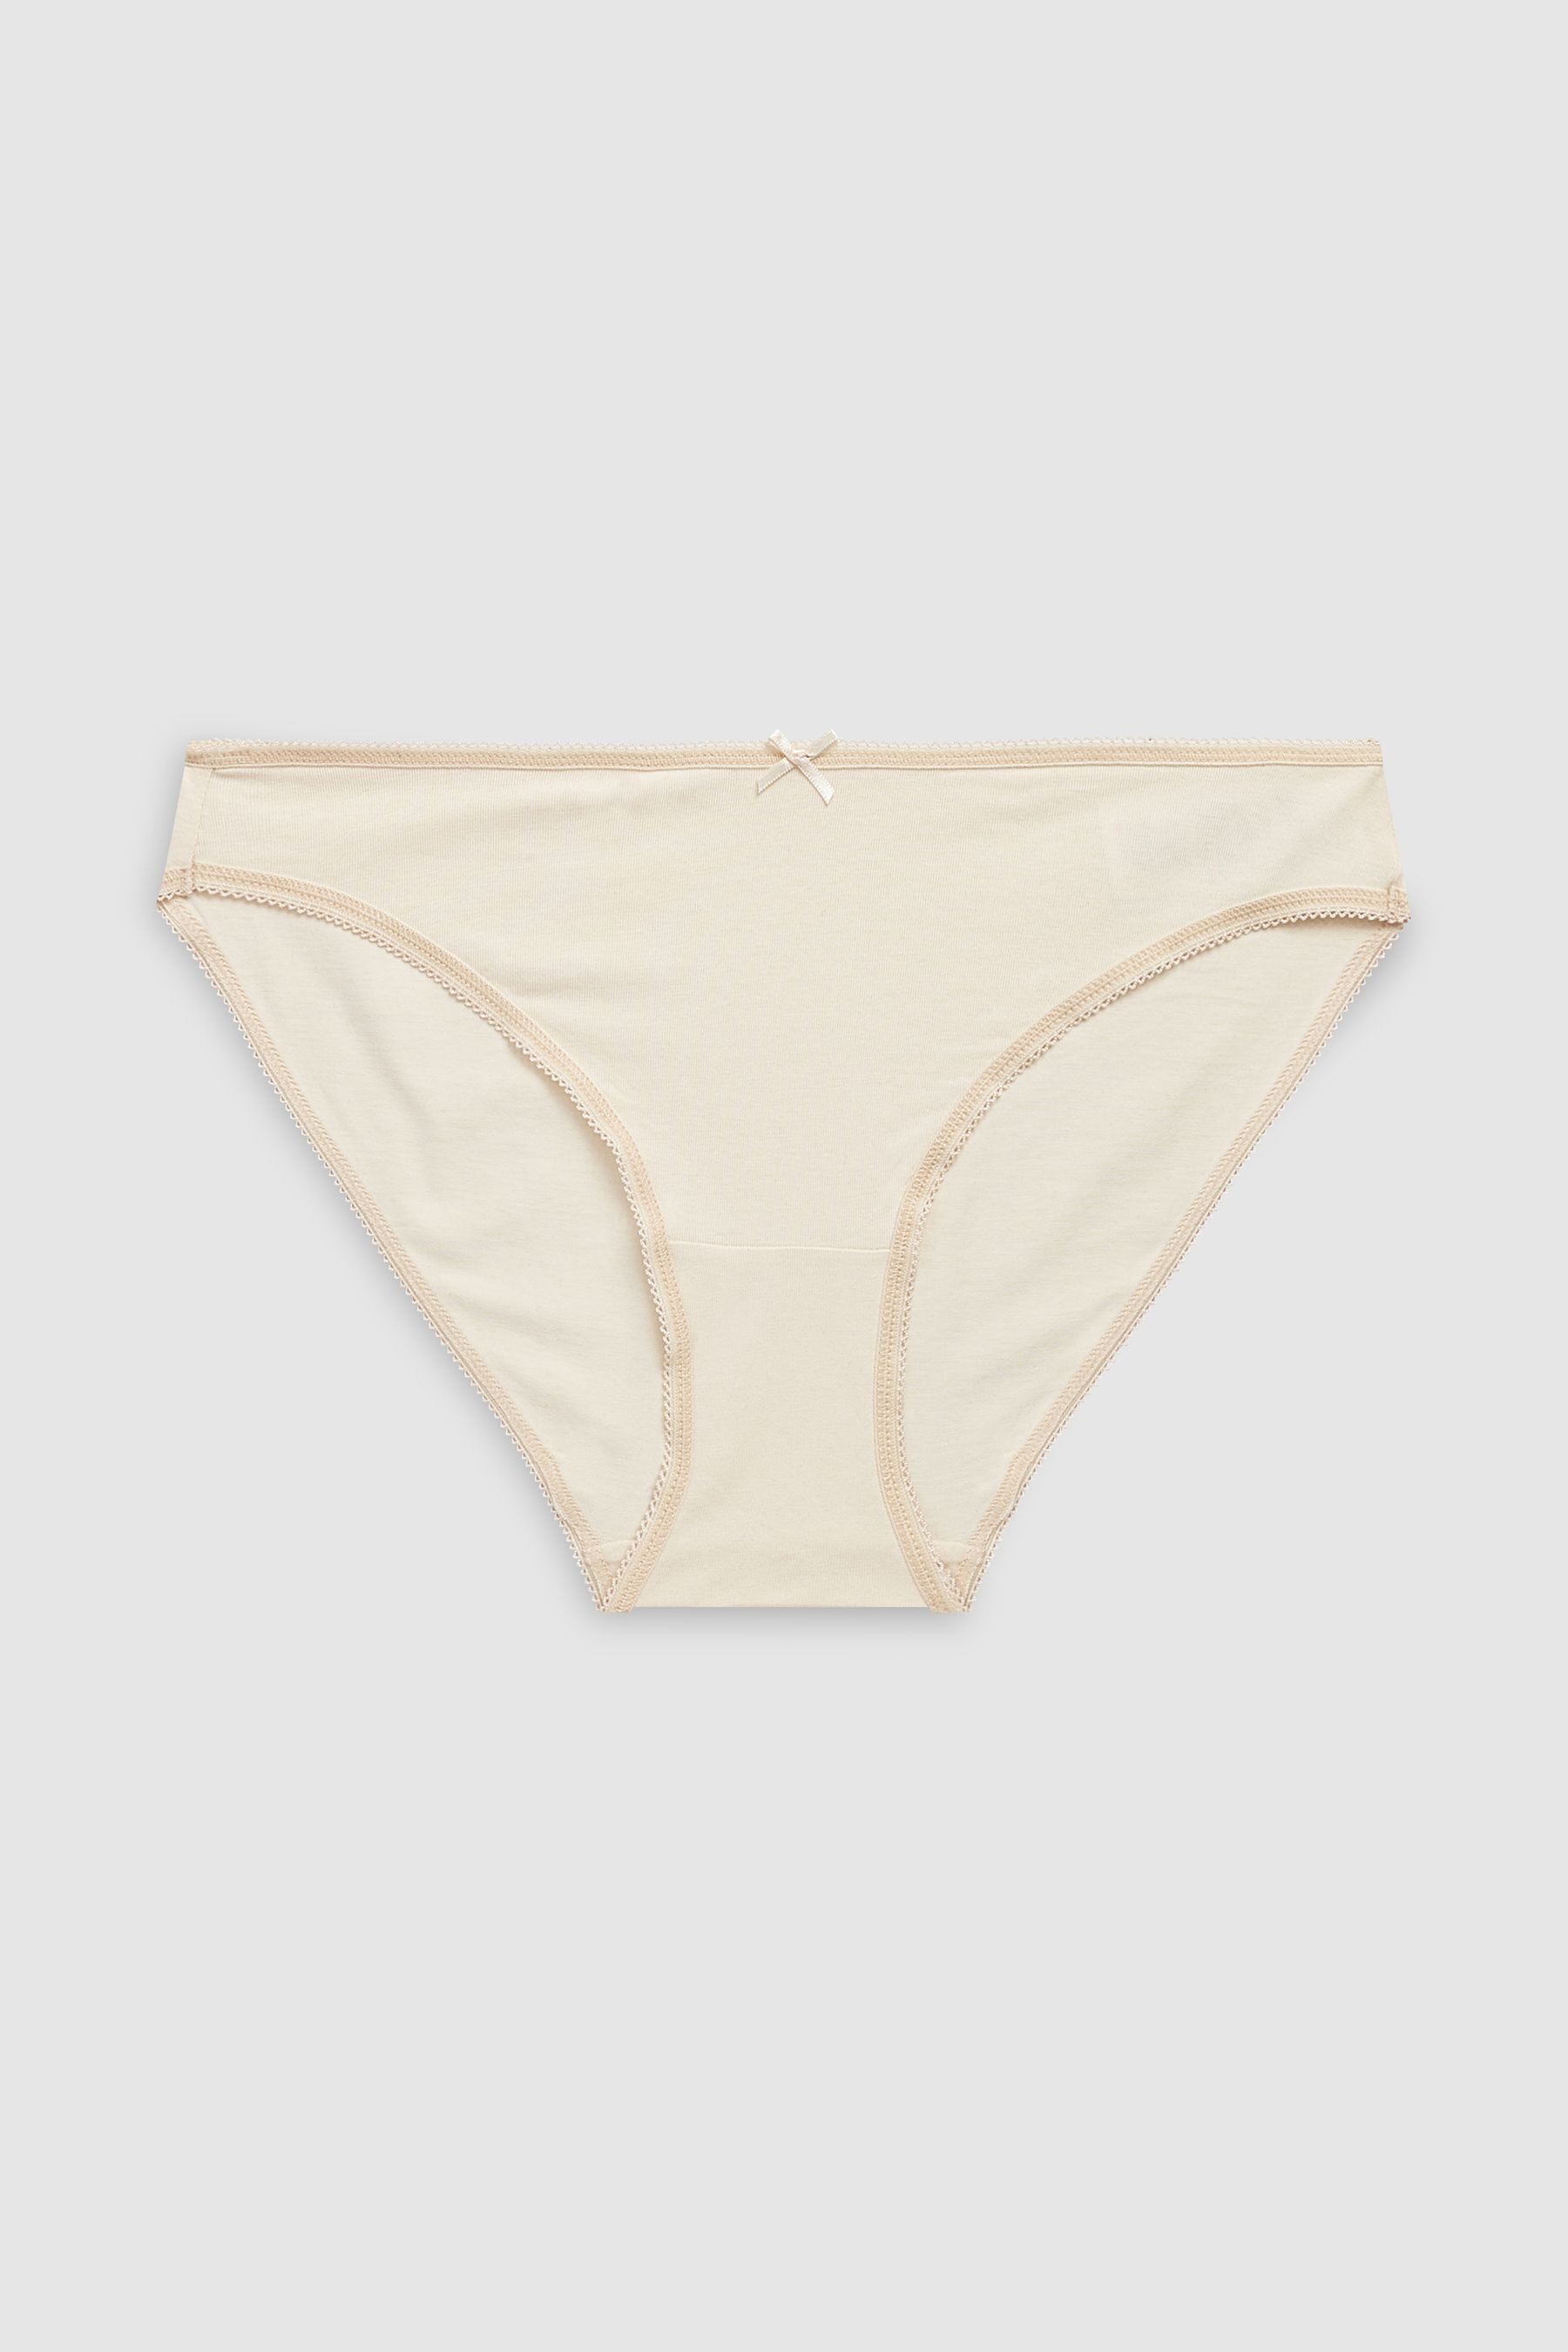 Cotton Knickers 5 Pack High Leg